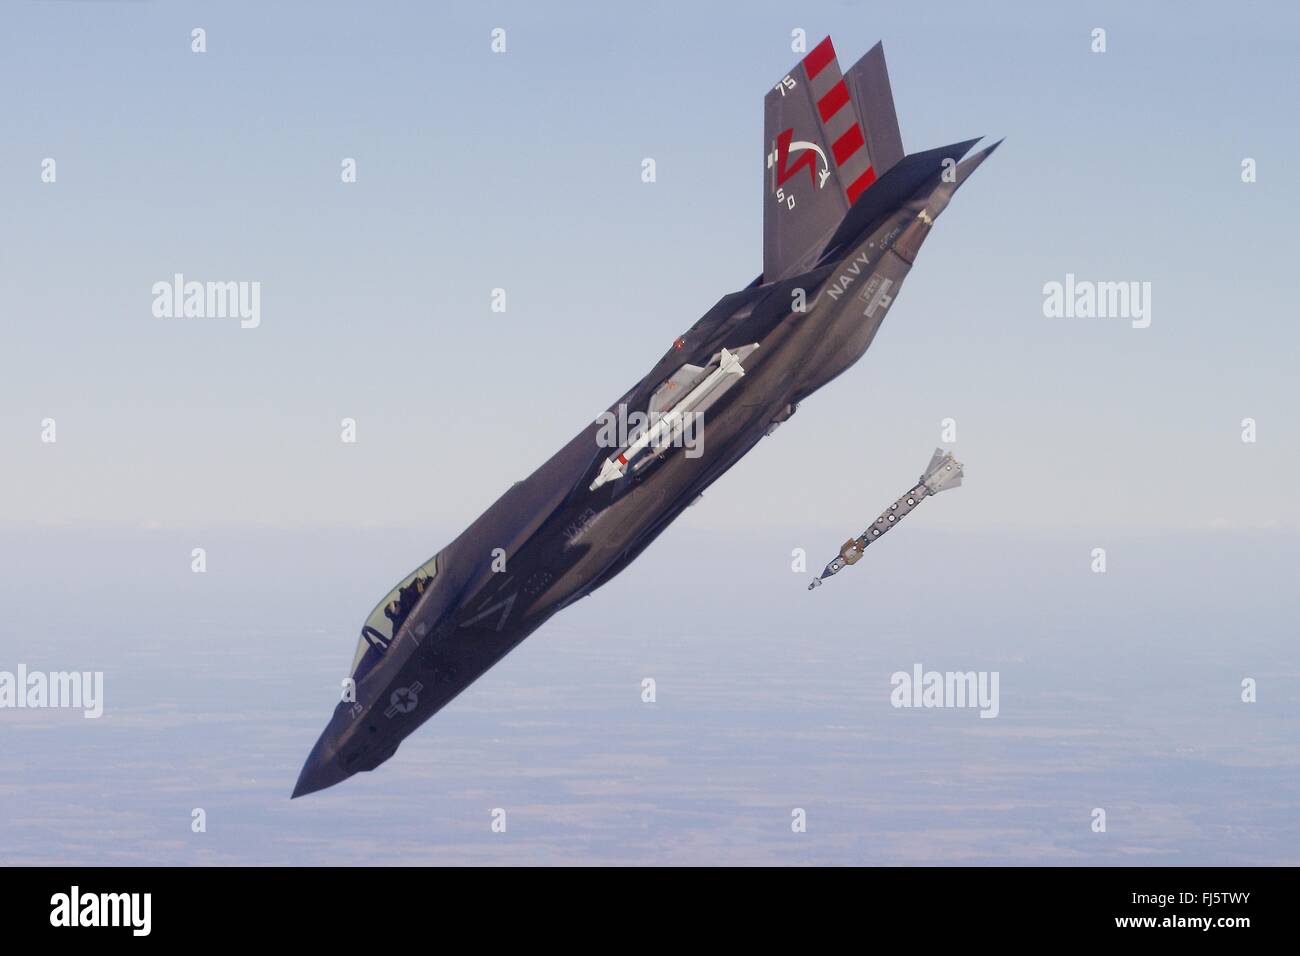 U.S. Navy F-35C Lightning II stealth fighter carrier variant enters a 45-degree dive dropping a GBU-12 Paveway II laser-guided smart bomb during a weapons test February 19, 2016 near NAS Patuxent River, Maryland. Stock Photo